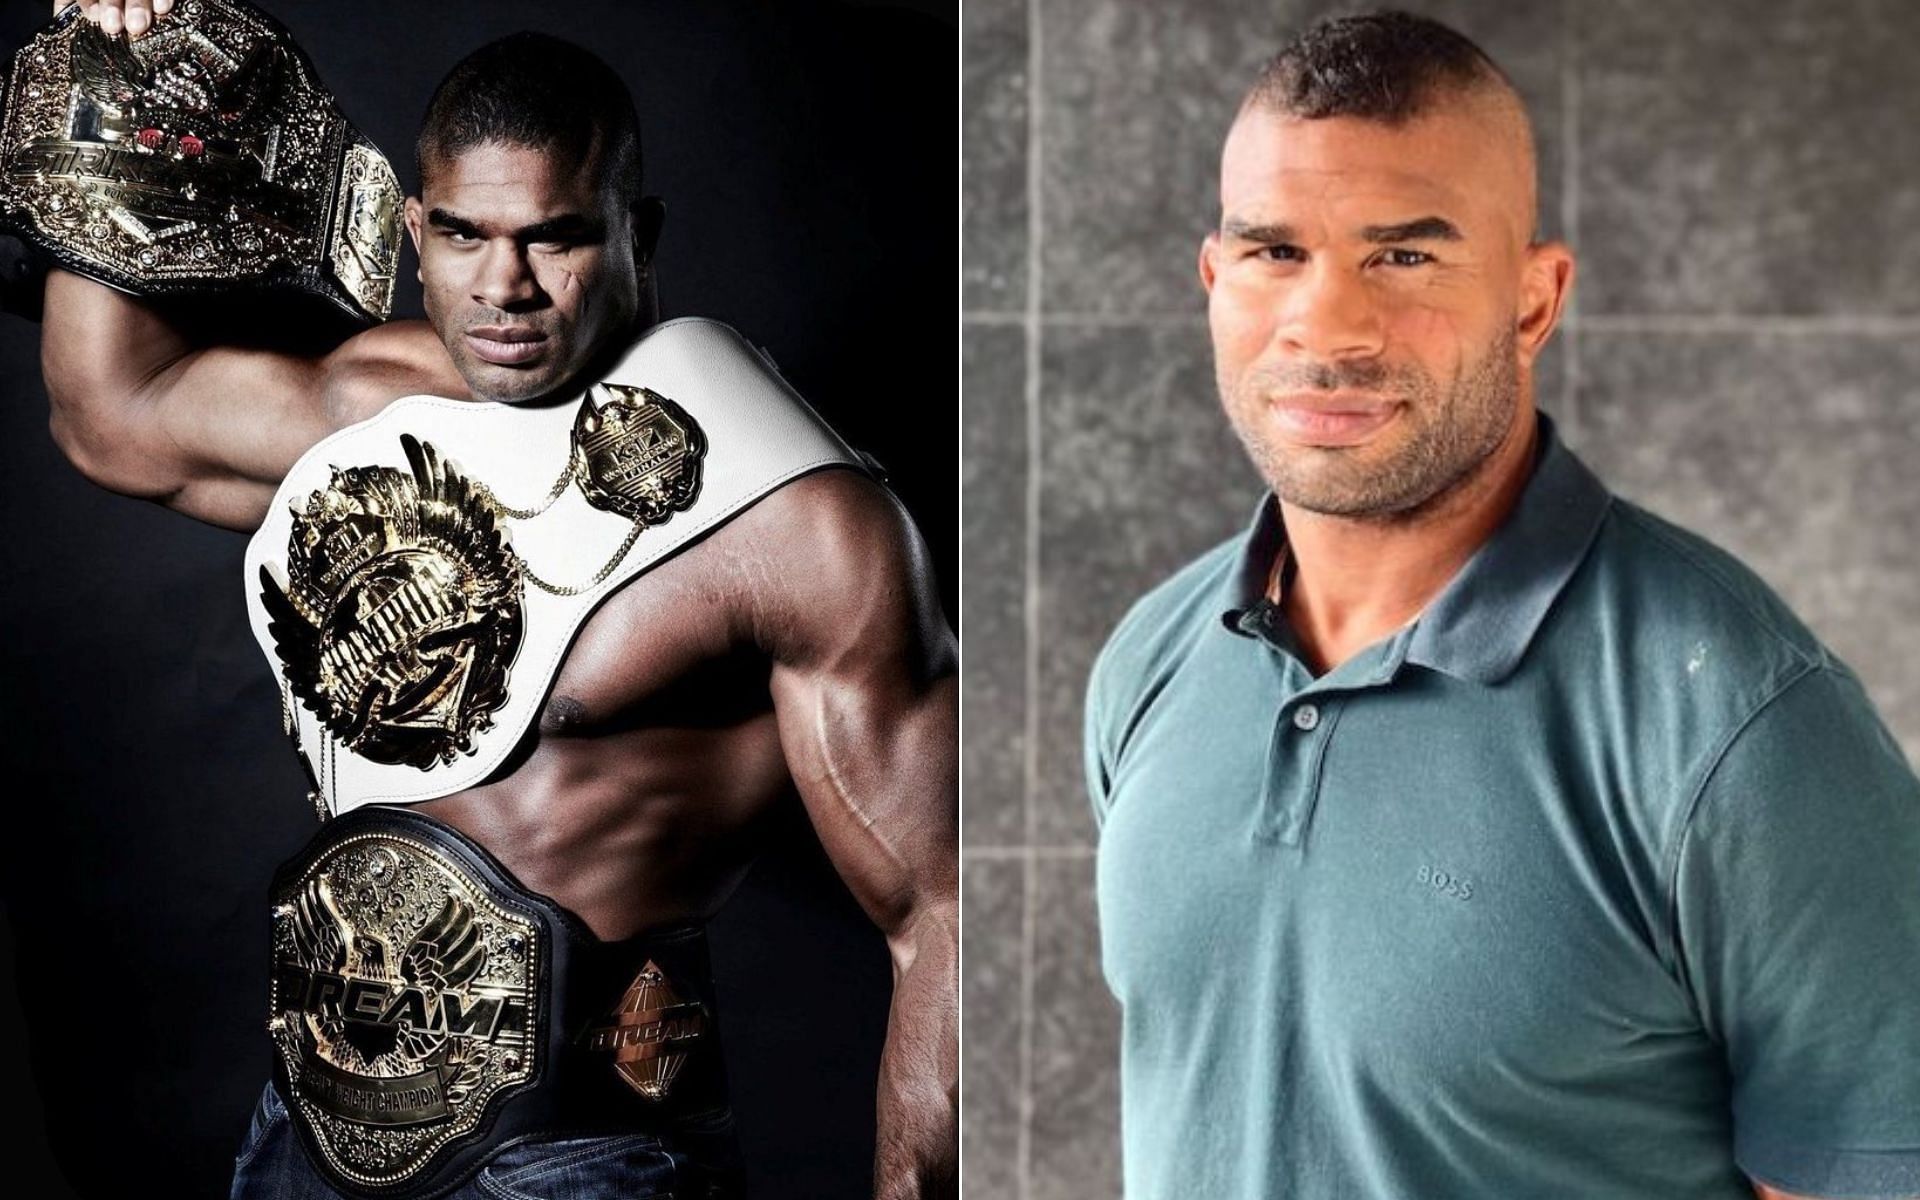 Alistair Overeem with his championships [Left], and Alistair Overeem currently [Right] [Photo credit: @Alistairovereem and @WybrenvanHaga - X]